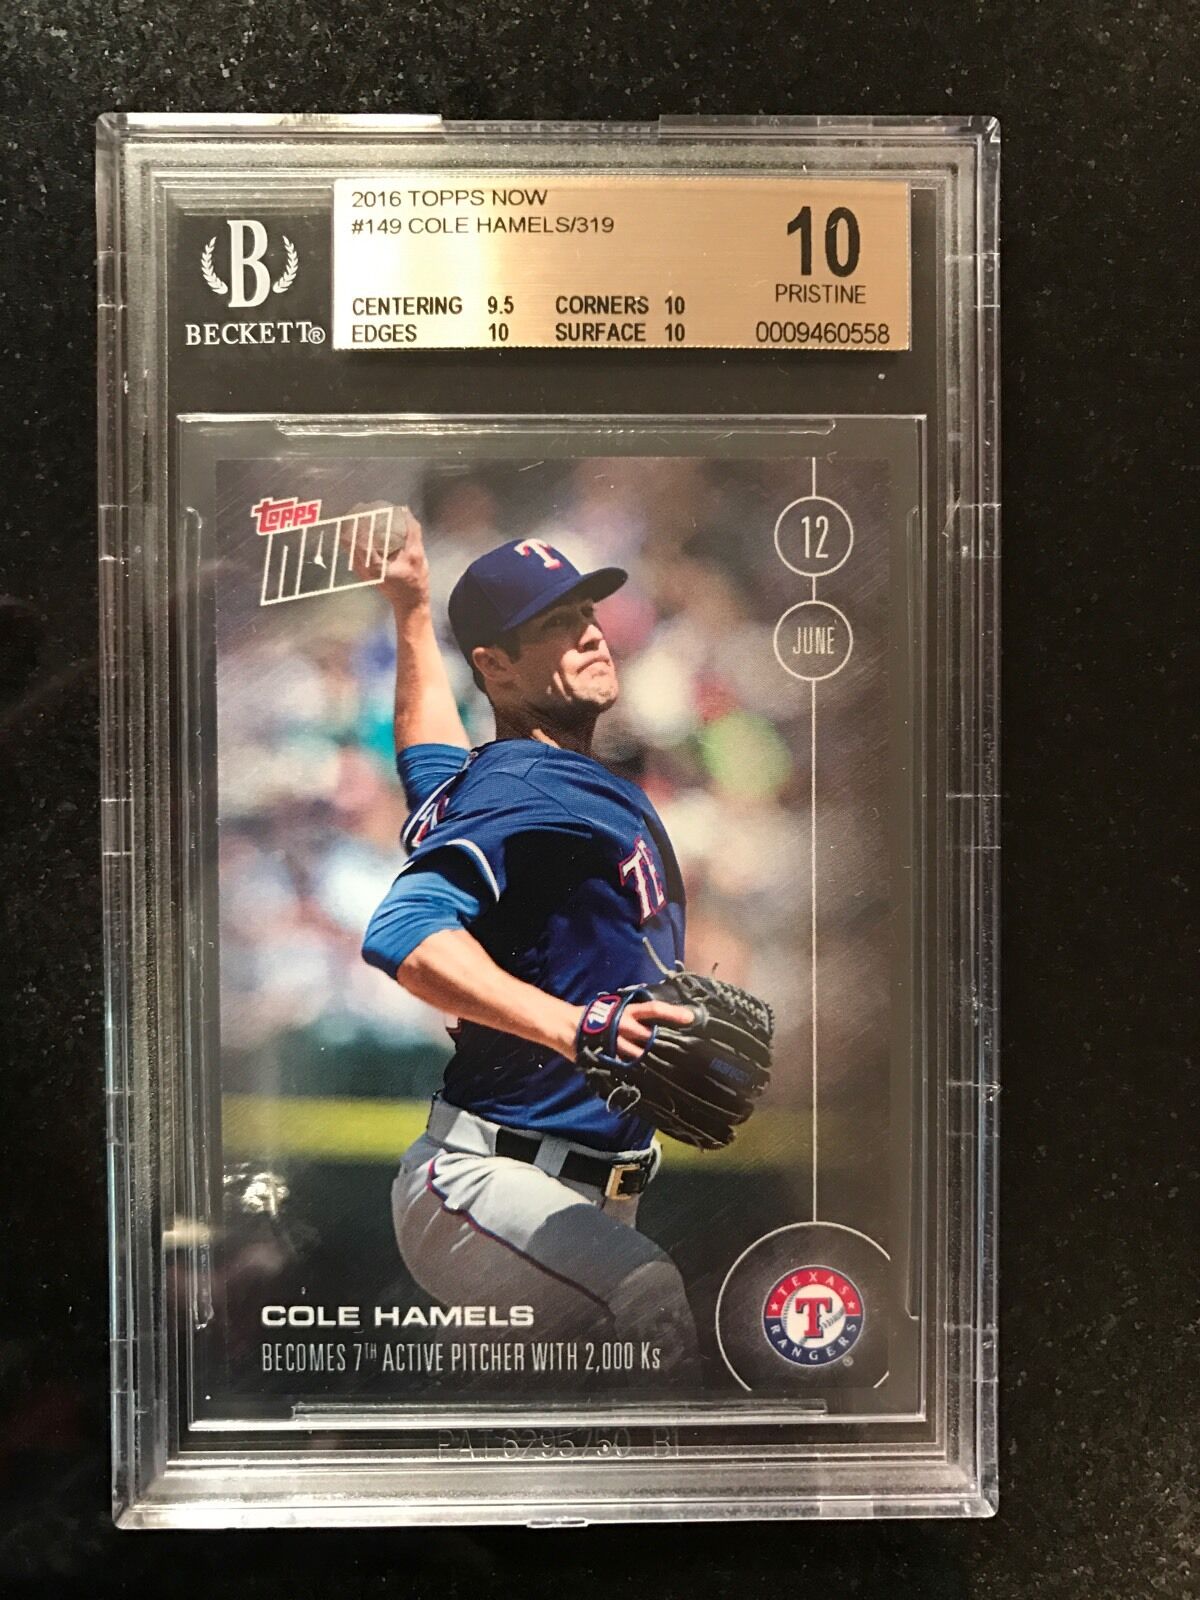 2016 Topps Now #149 Cole Hamels/319* TEXAS ACE -WS/AS/NO HITTER  BGS 10 PRISTINE